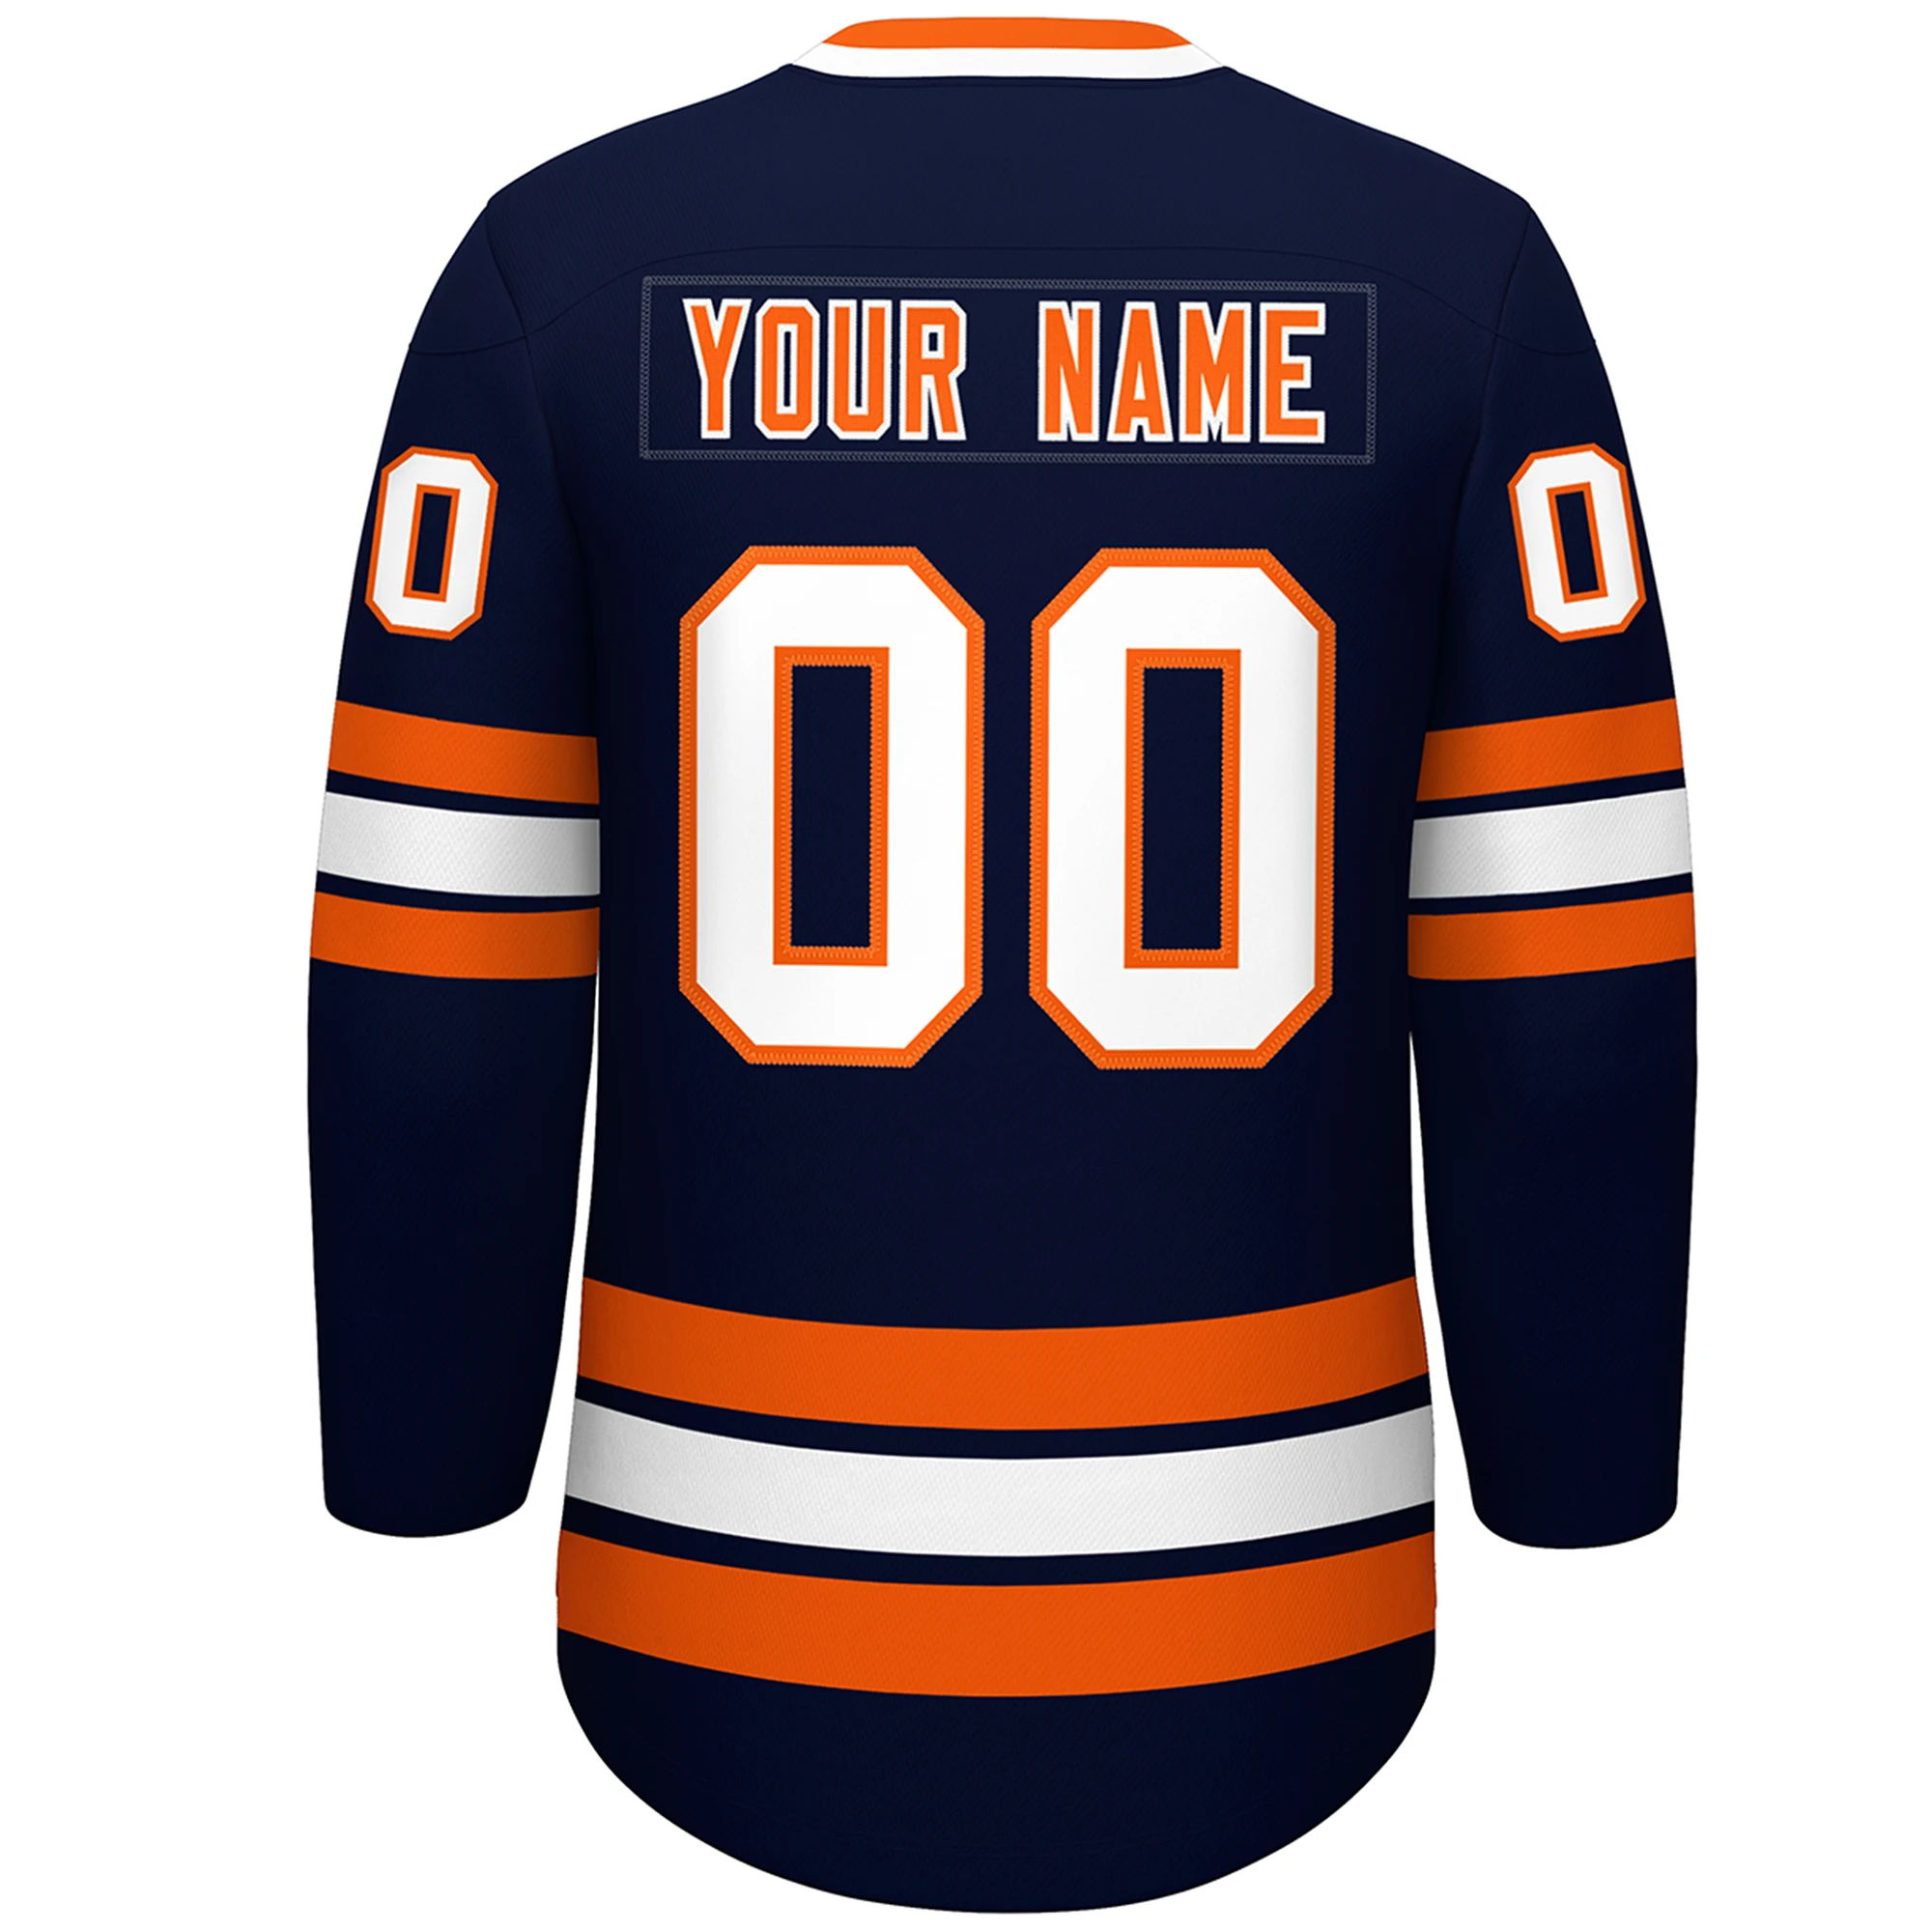 Printed Ice Hockey Jersey Customized Name & Numbers - Design Your Own Ice Hockey Jersey Competition Training Jerseys